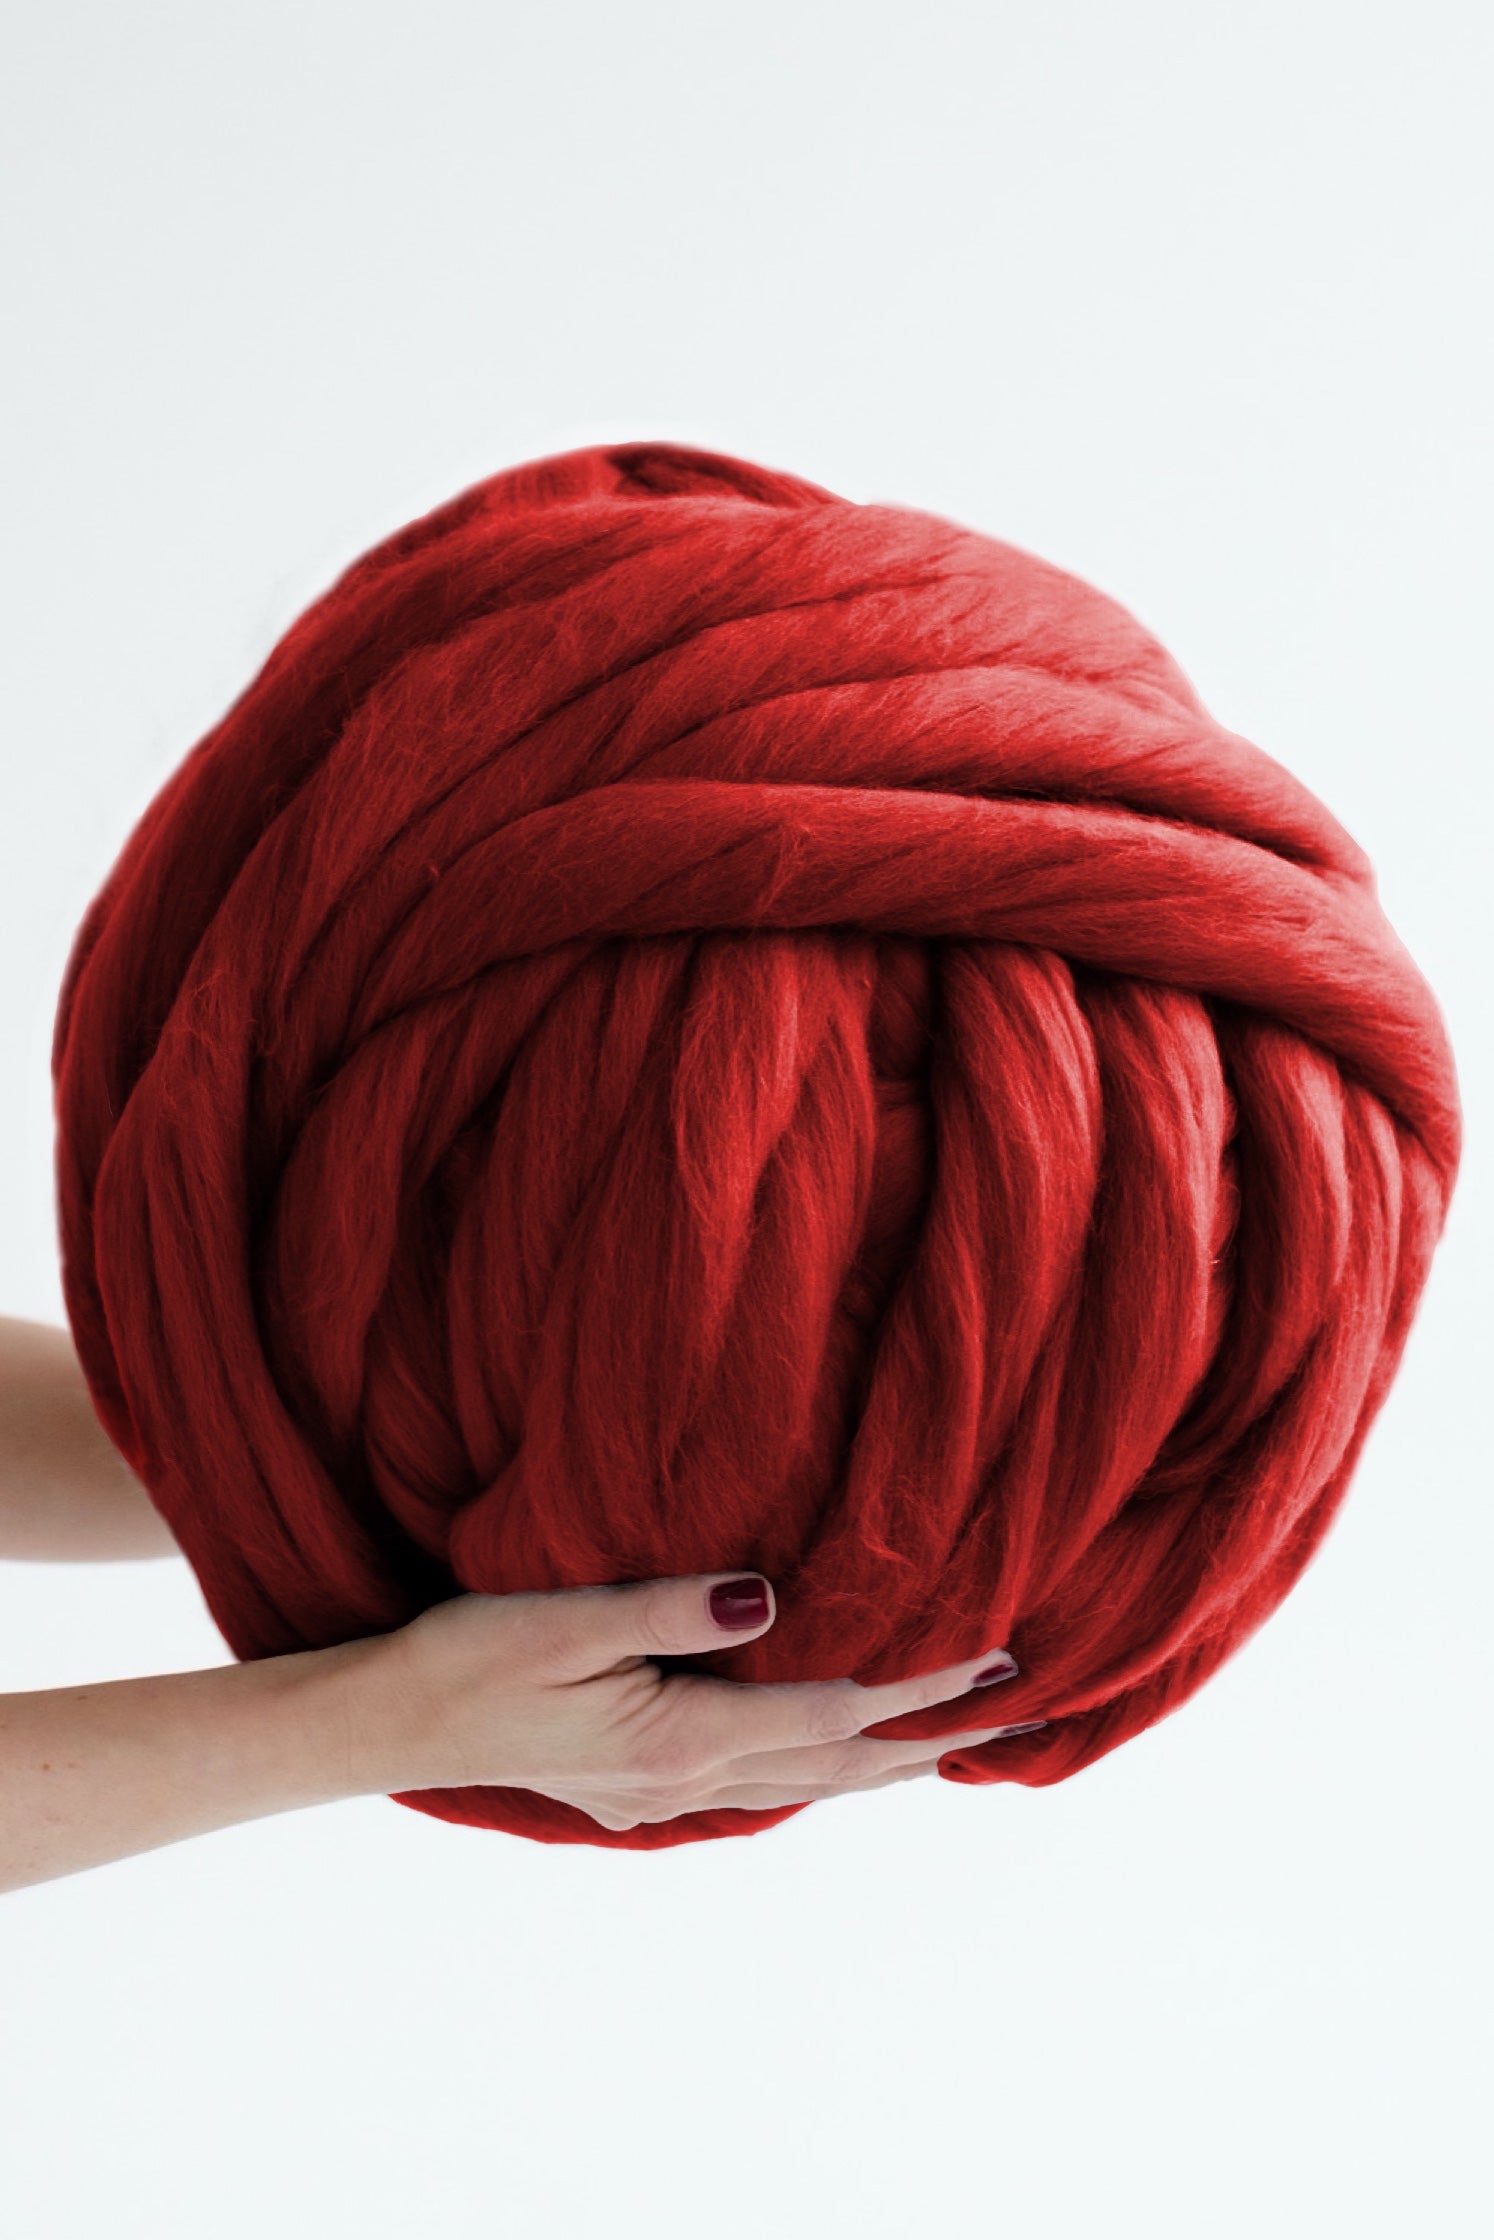 Red Yarn for Knitting and Crochet at WEBS